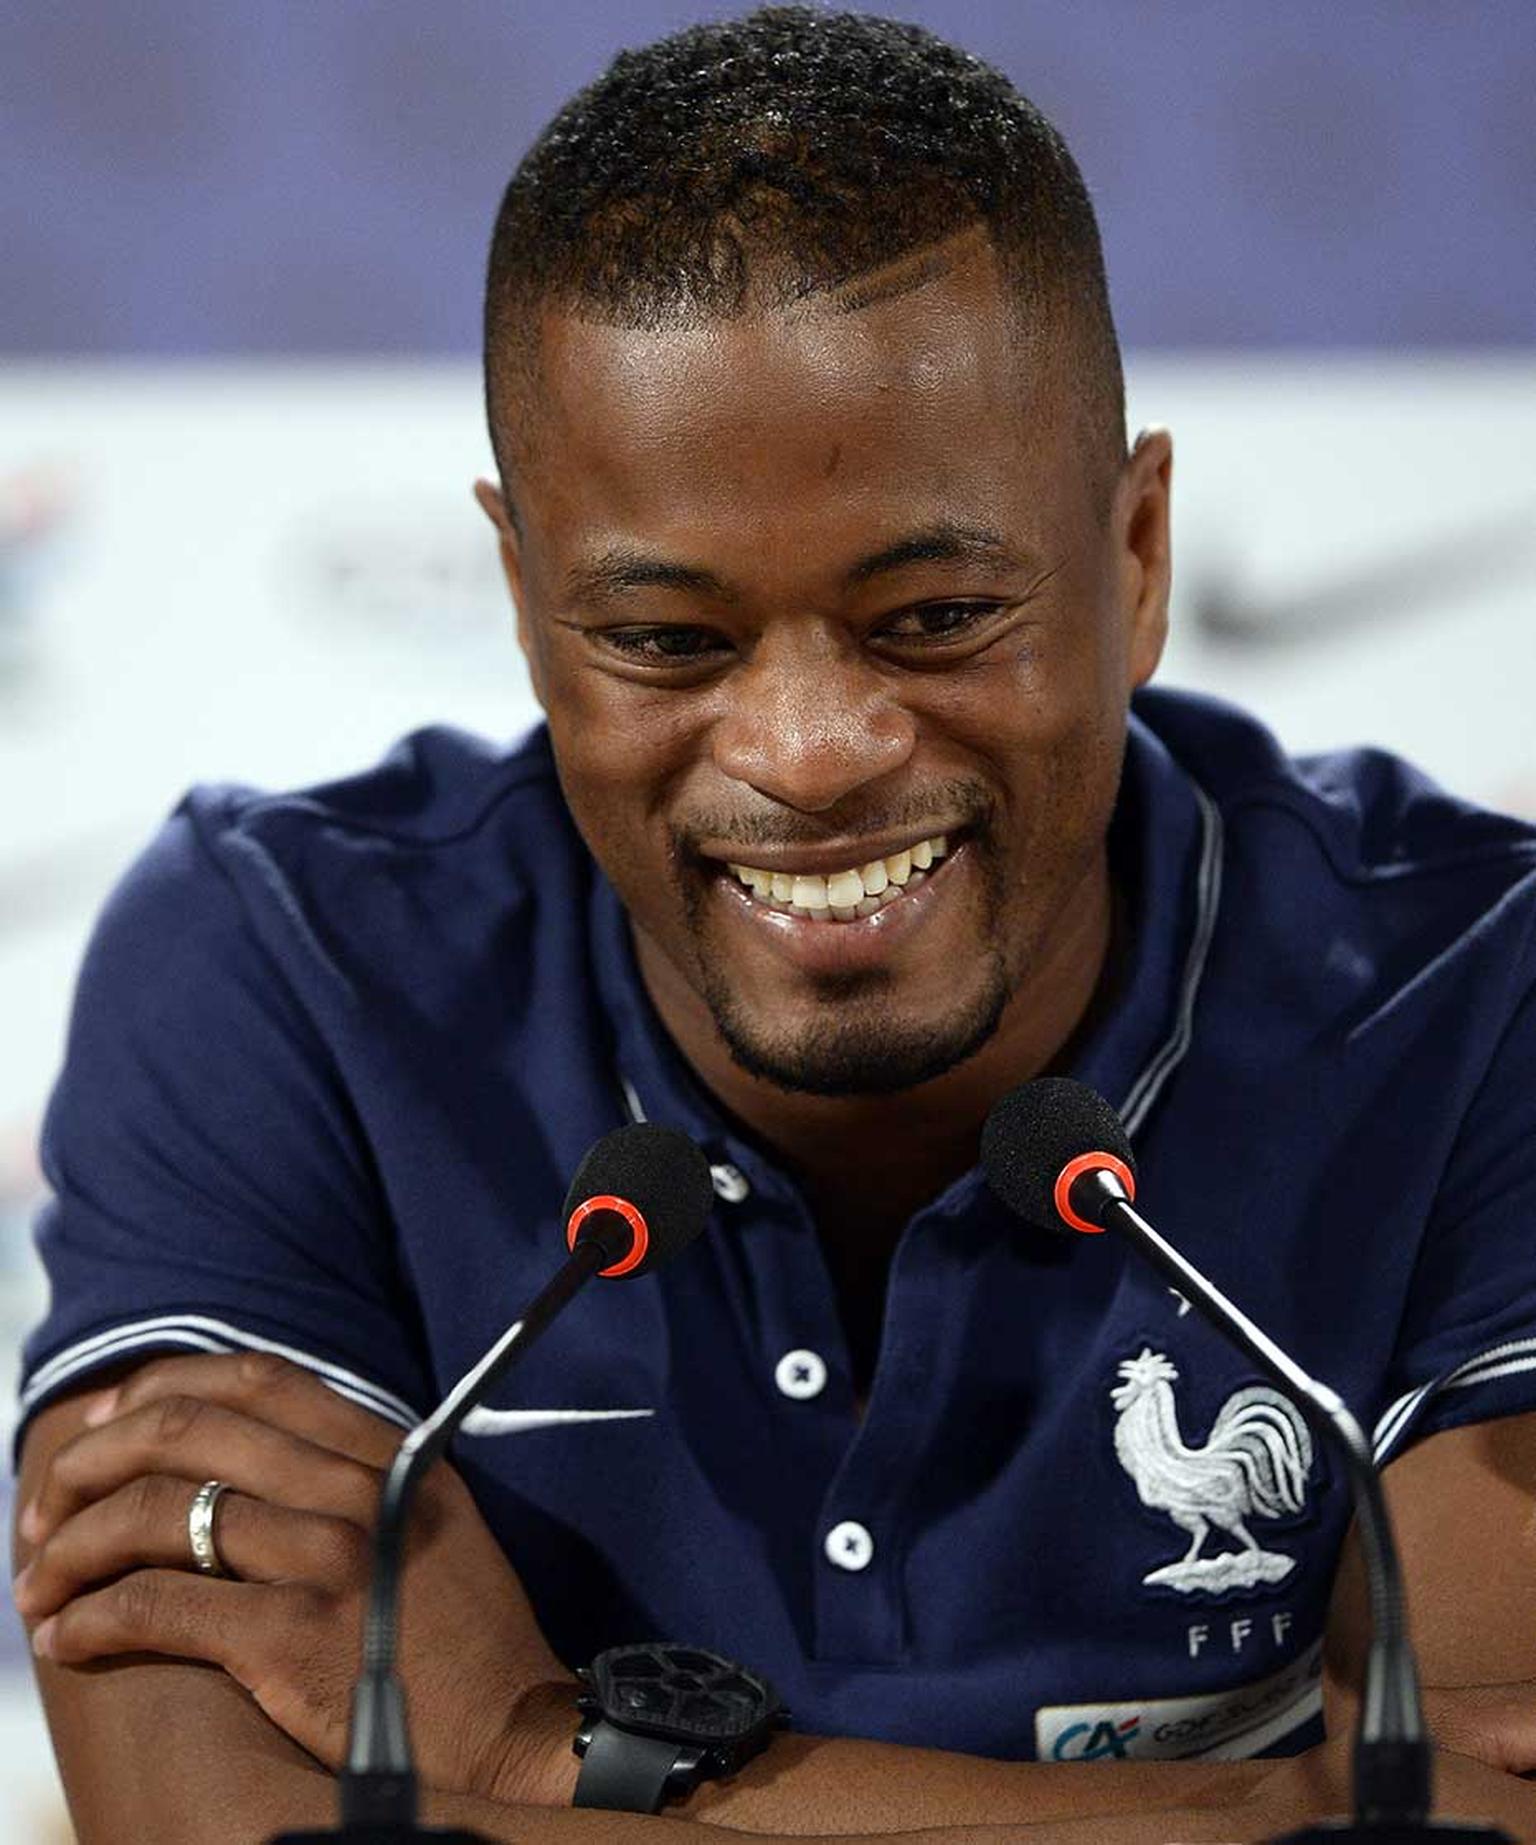 Manchester United player and French defender Patrice Evra has every reason to be happy. France is through to the semi-finals in the biggest event in the football calendar, and he has a Jacob & Co Ghost watch strapped to his wrist.